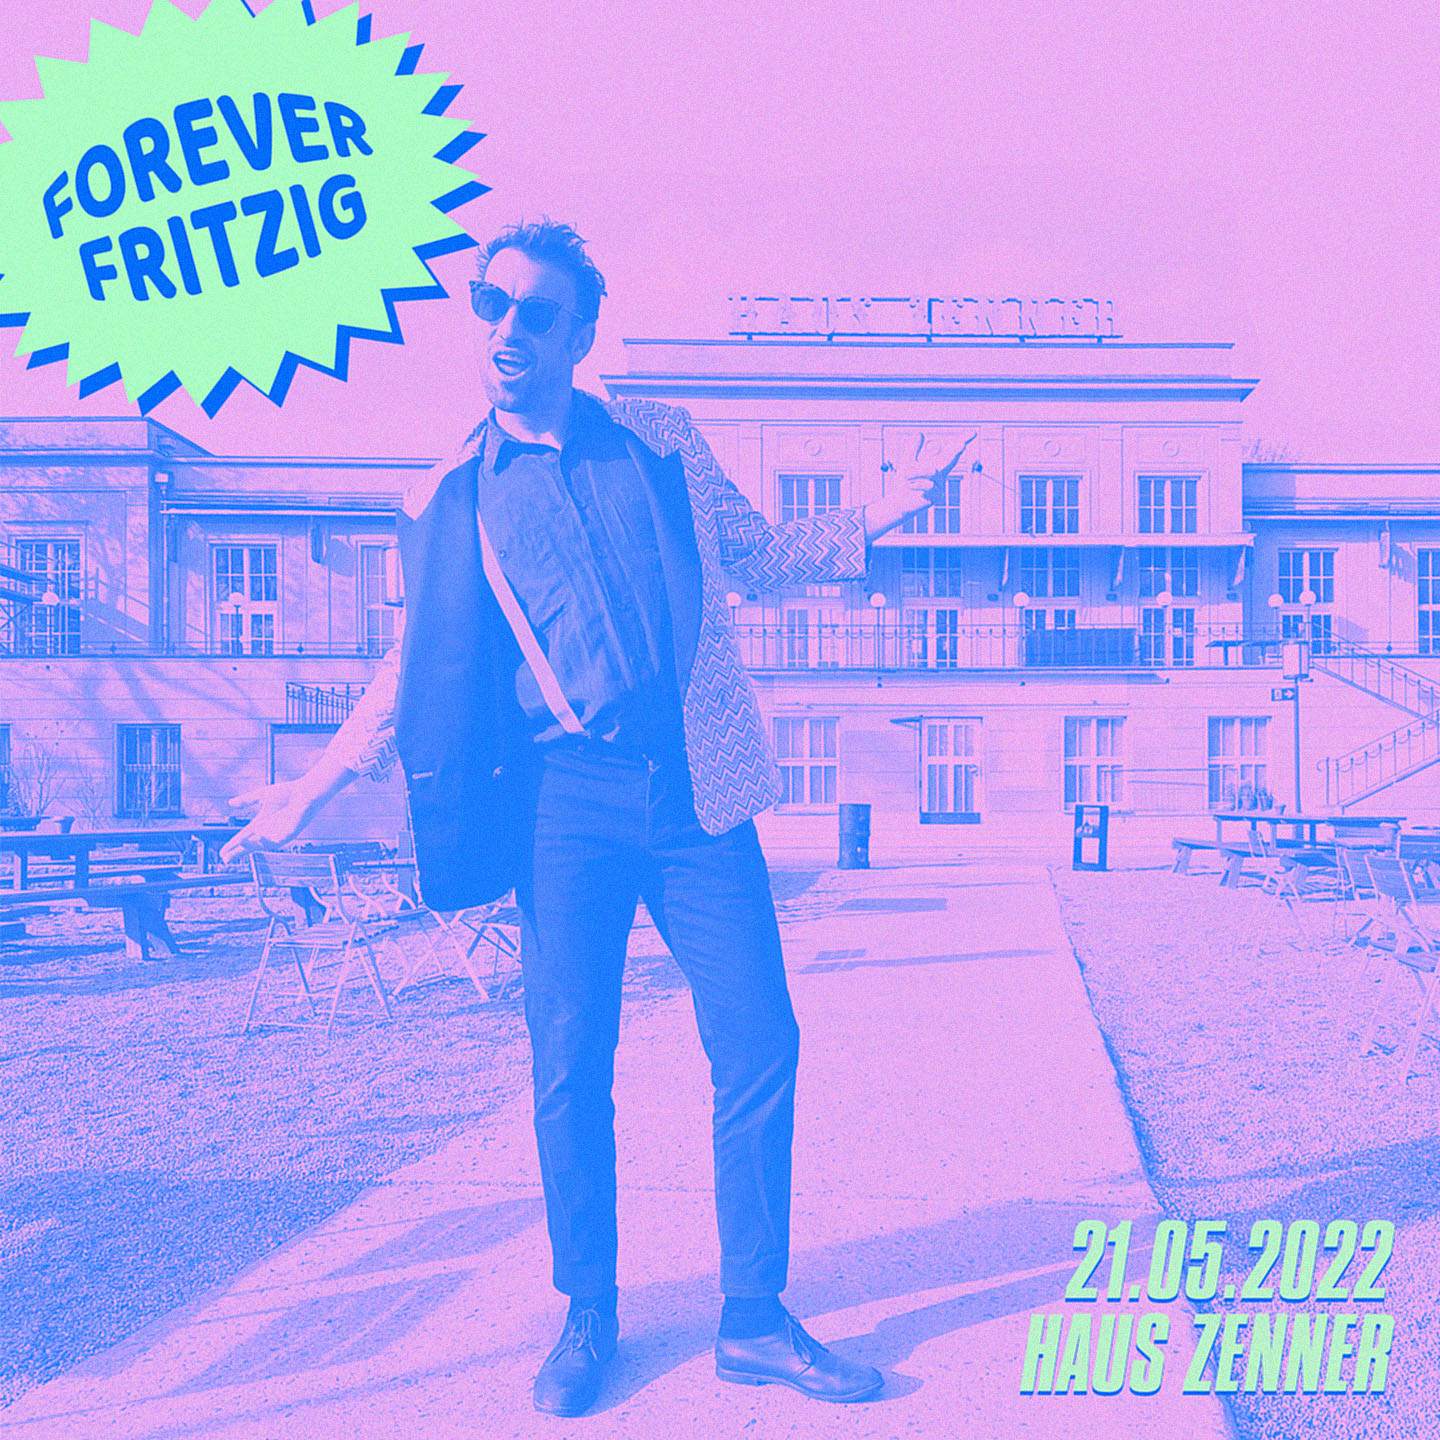 Forever Fritzig - フライヤー表